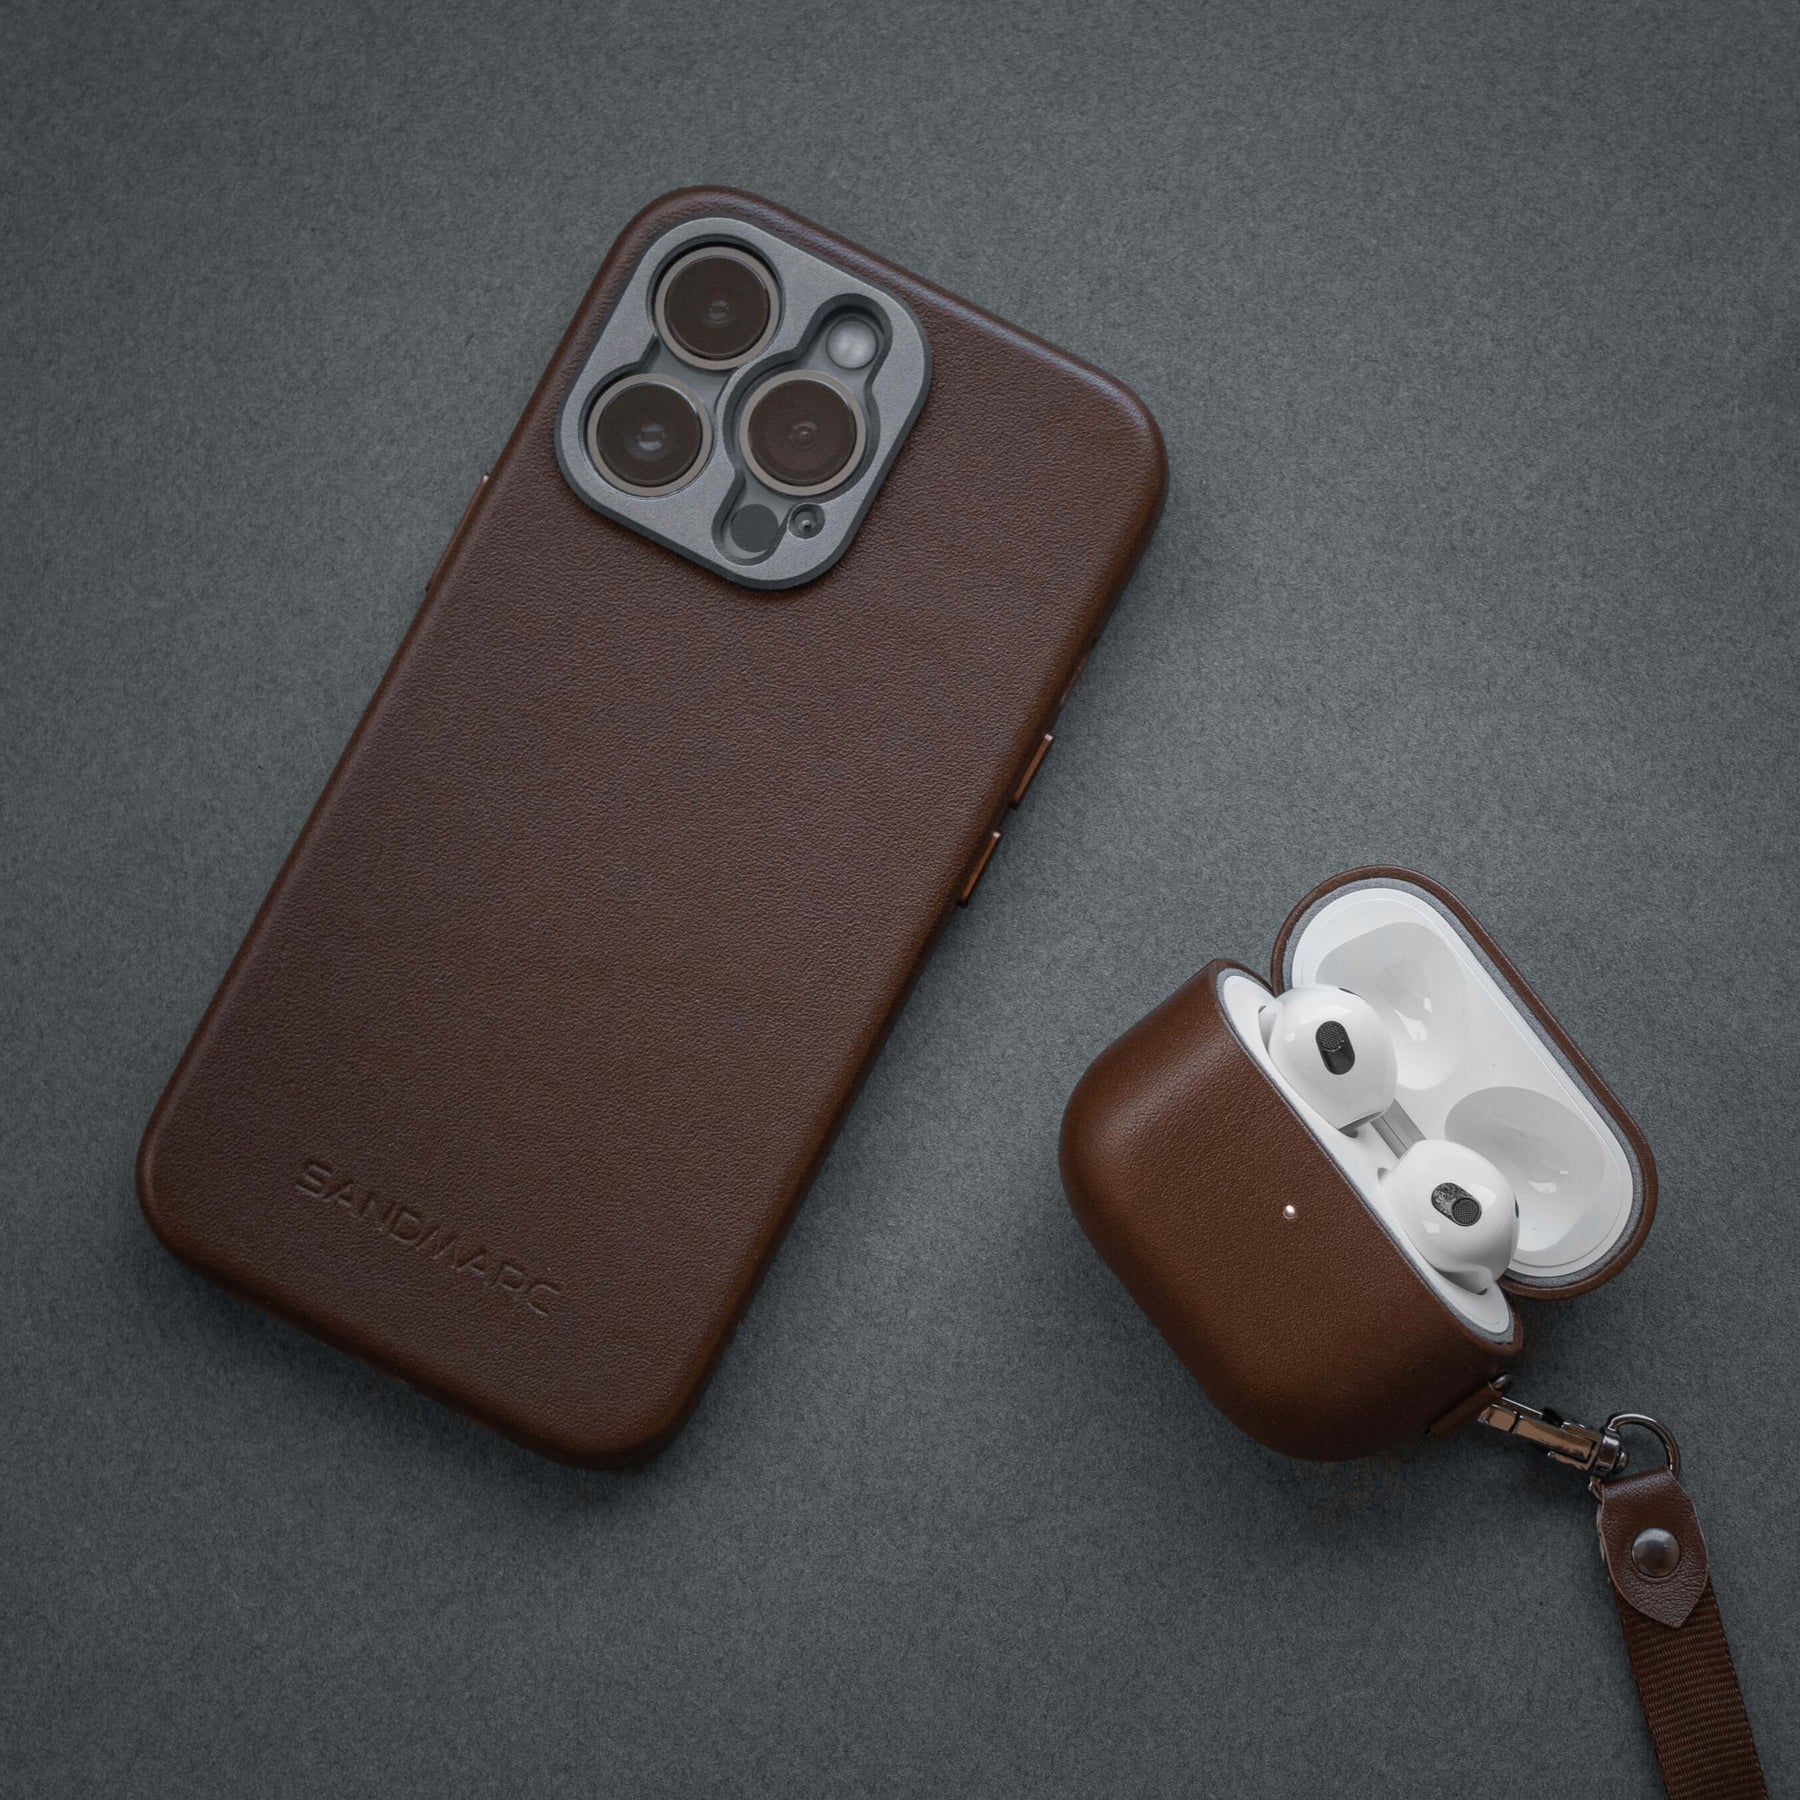 Airpods Pro 3 – Mobile Cover pakistan